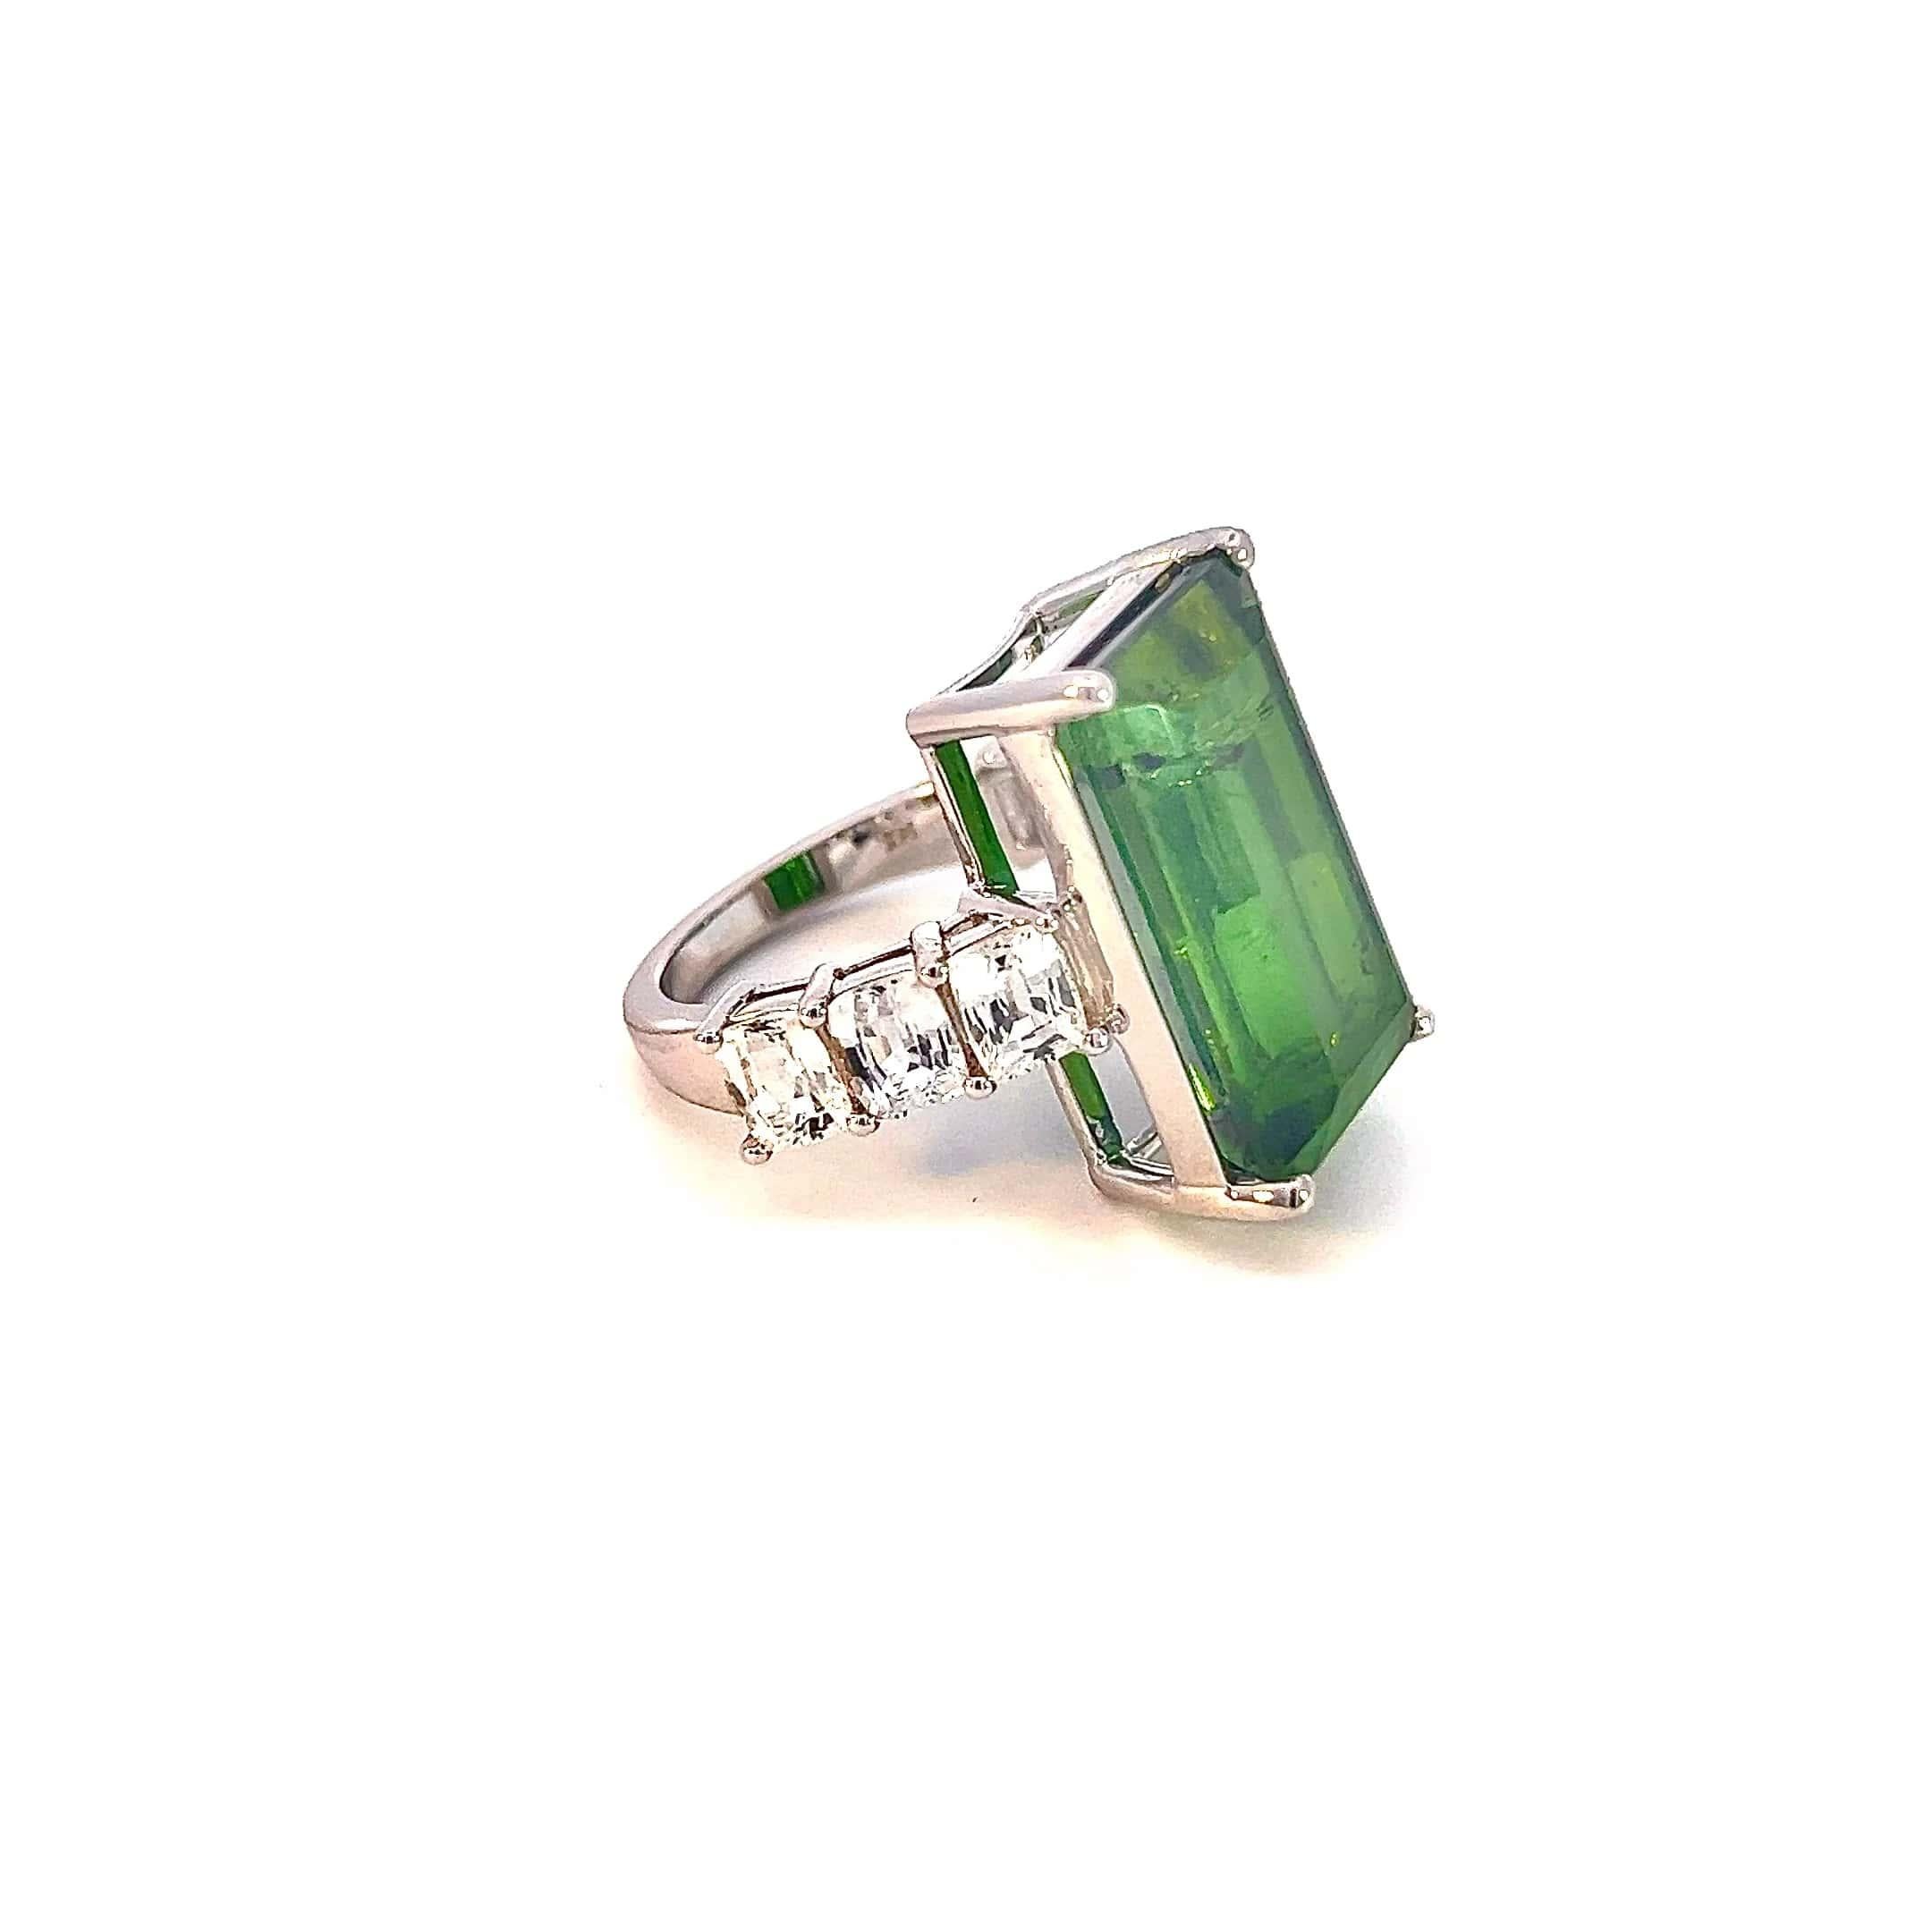 Natural Tourmaline White Sapphire Ring 6.75 14k WG 21.03 TCW Certified For Sale 1